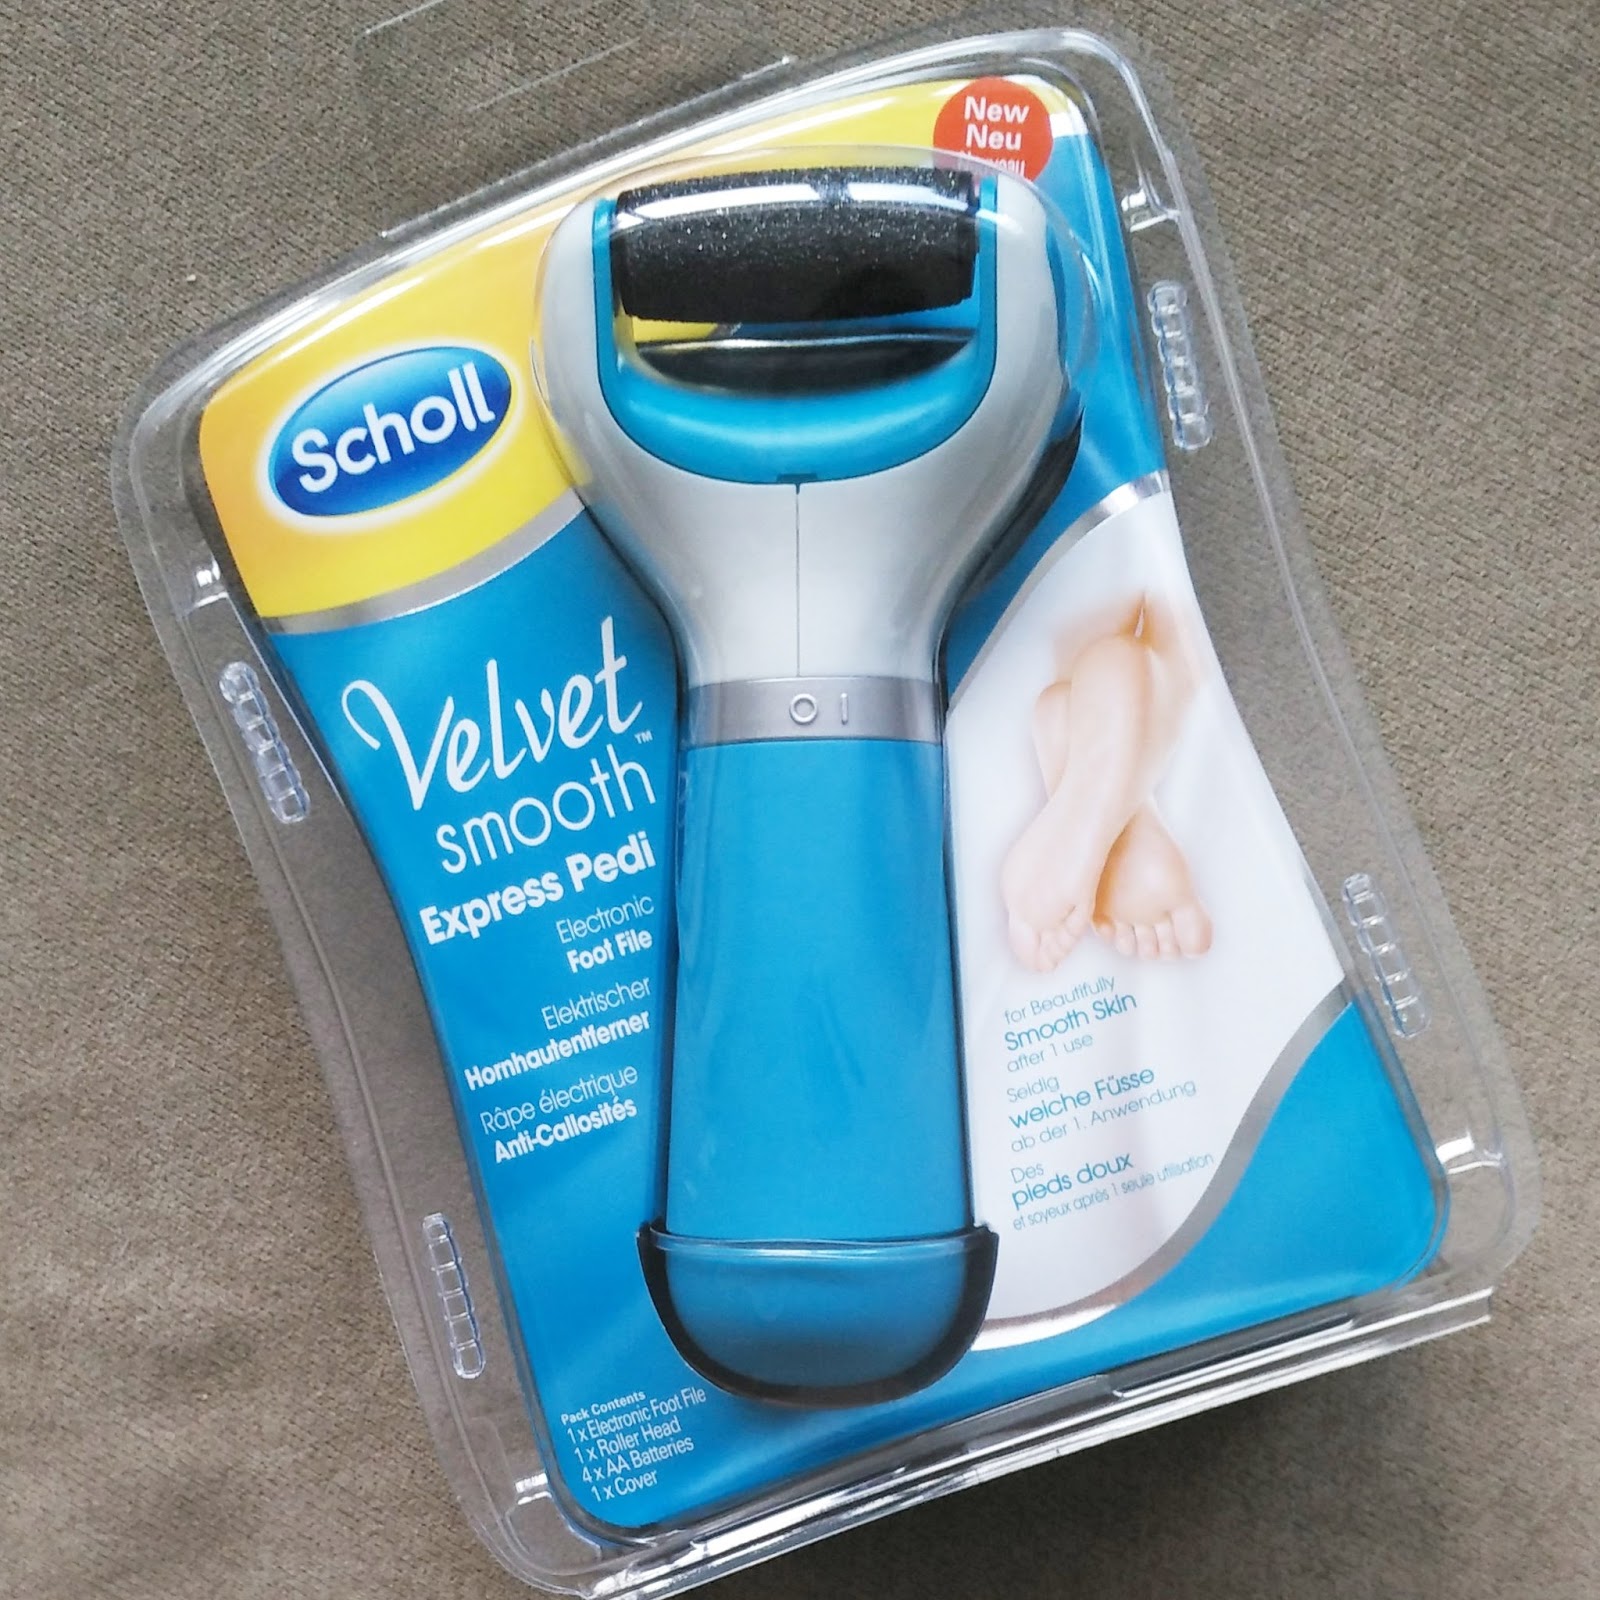 scholl velvet smooth express pedi electronic foot file review